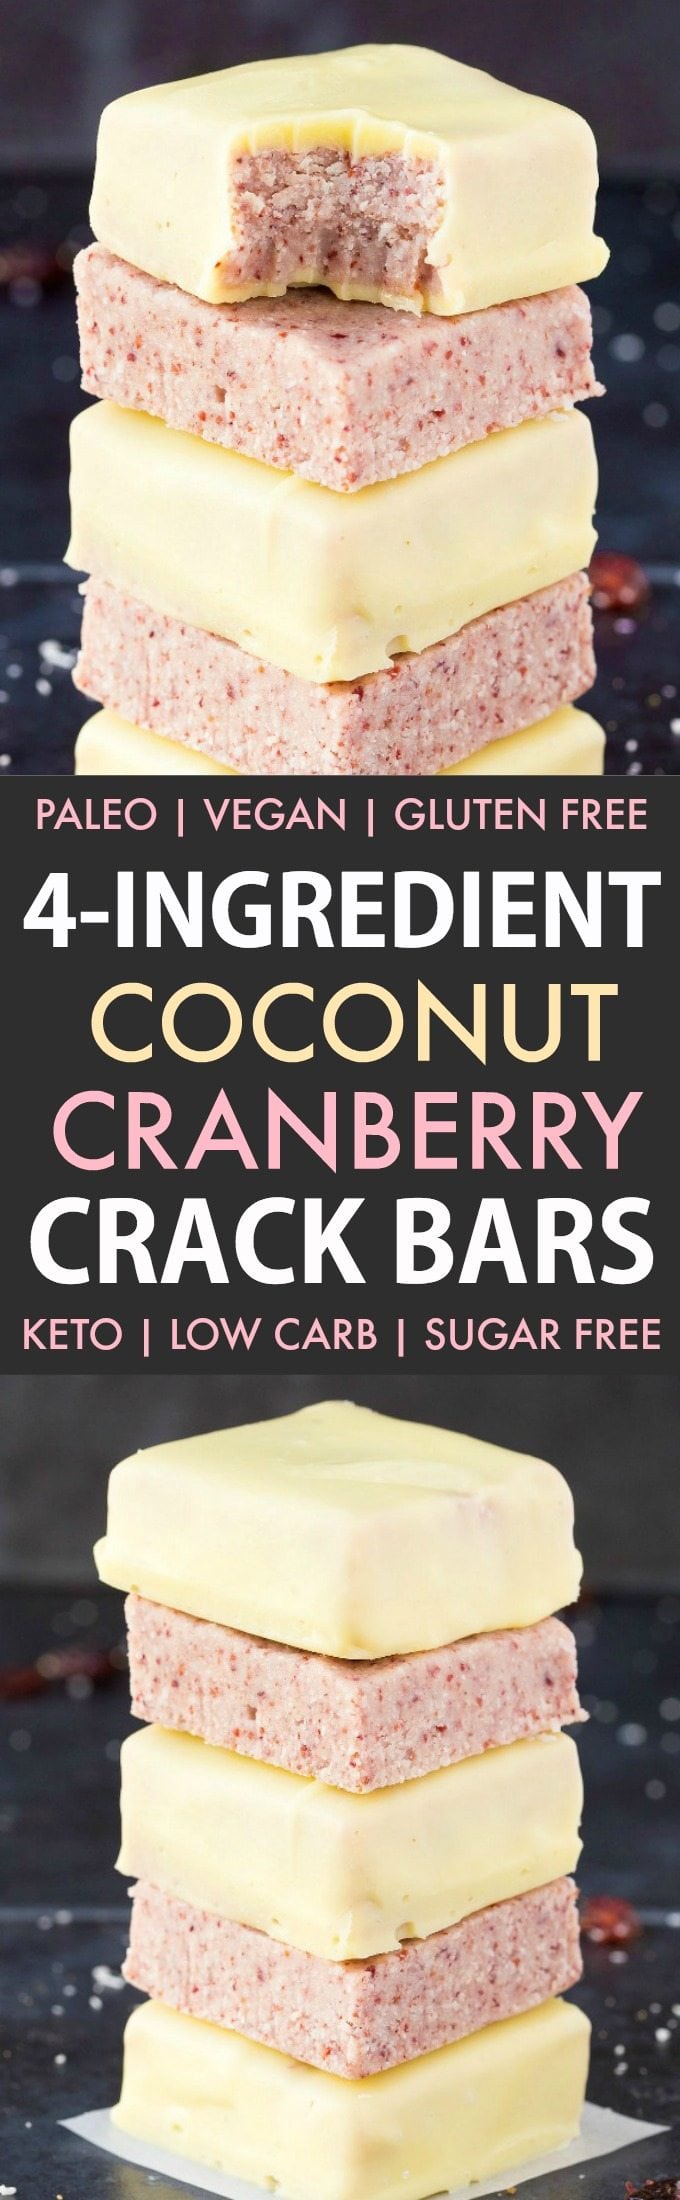 4-Ingredient No Bake Coconut Cranberry Crack Bars (Paleo, Vegan, Keto, Sugar Free, Gluten Free)- Easy, healthy and seriously addictive coconut cranberry bars using just 4 ingredients and needing 5 minutes! A satisfying snack, dessert or holiday gift. #keto #ketodessert #coconut #cranberry #nobake | Recipe on thebigmansworld.com